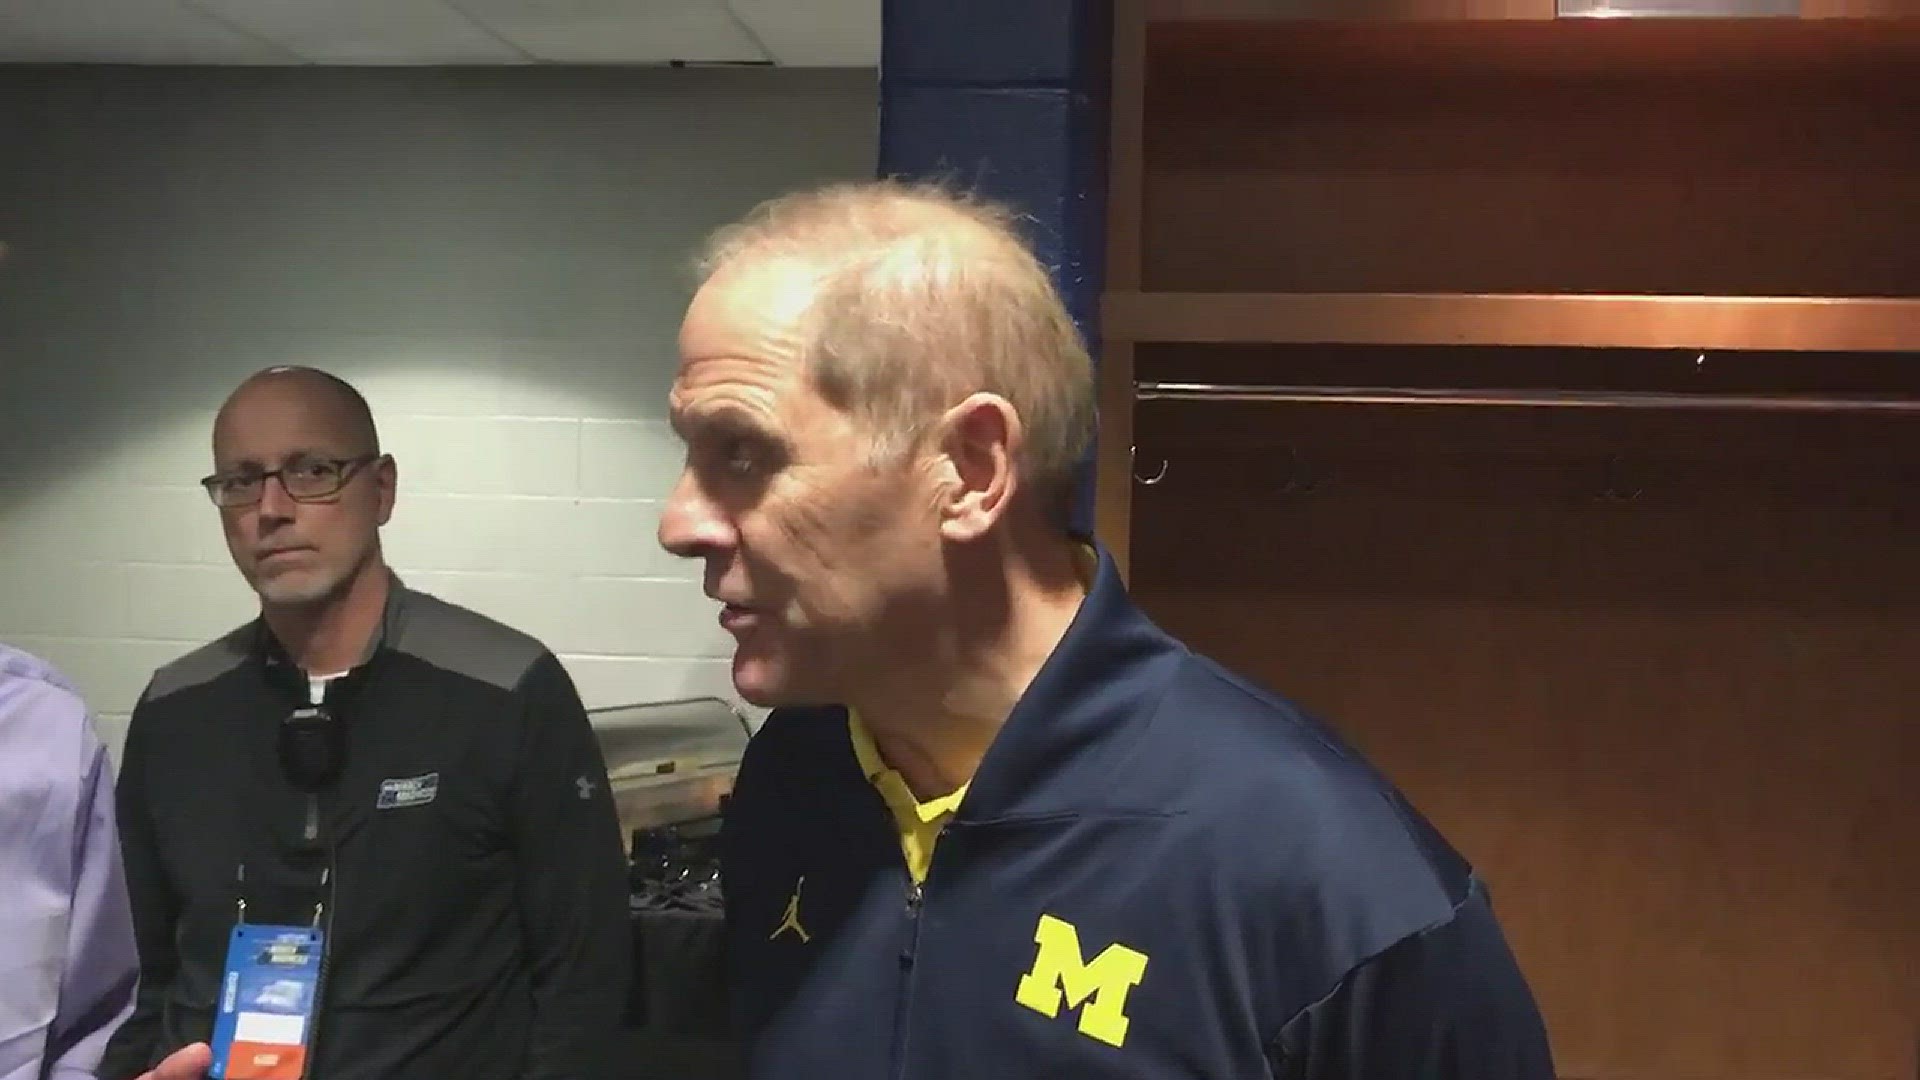 Michigan basketball coach John Beilein talks with members of the media in Wichita, Kan. on Wednesday, March 14, 2018. The Wolverines face Montana Thursday. Video by Nicholas Baumgardner, Detroit Free Press.